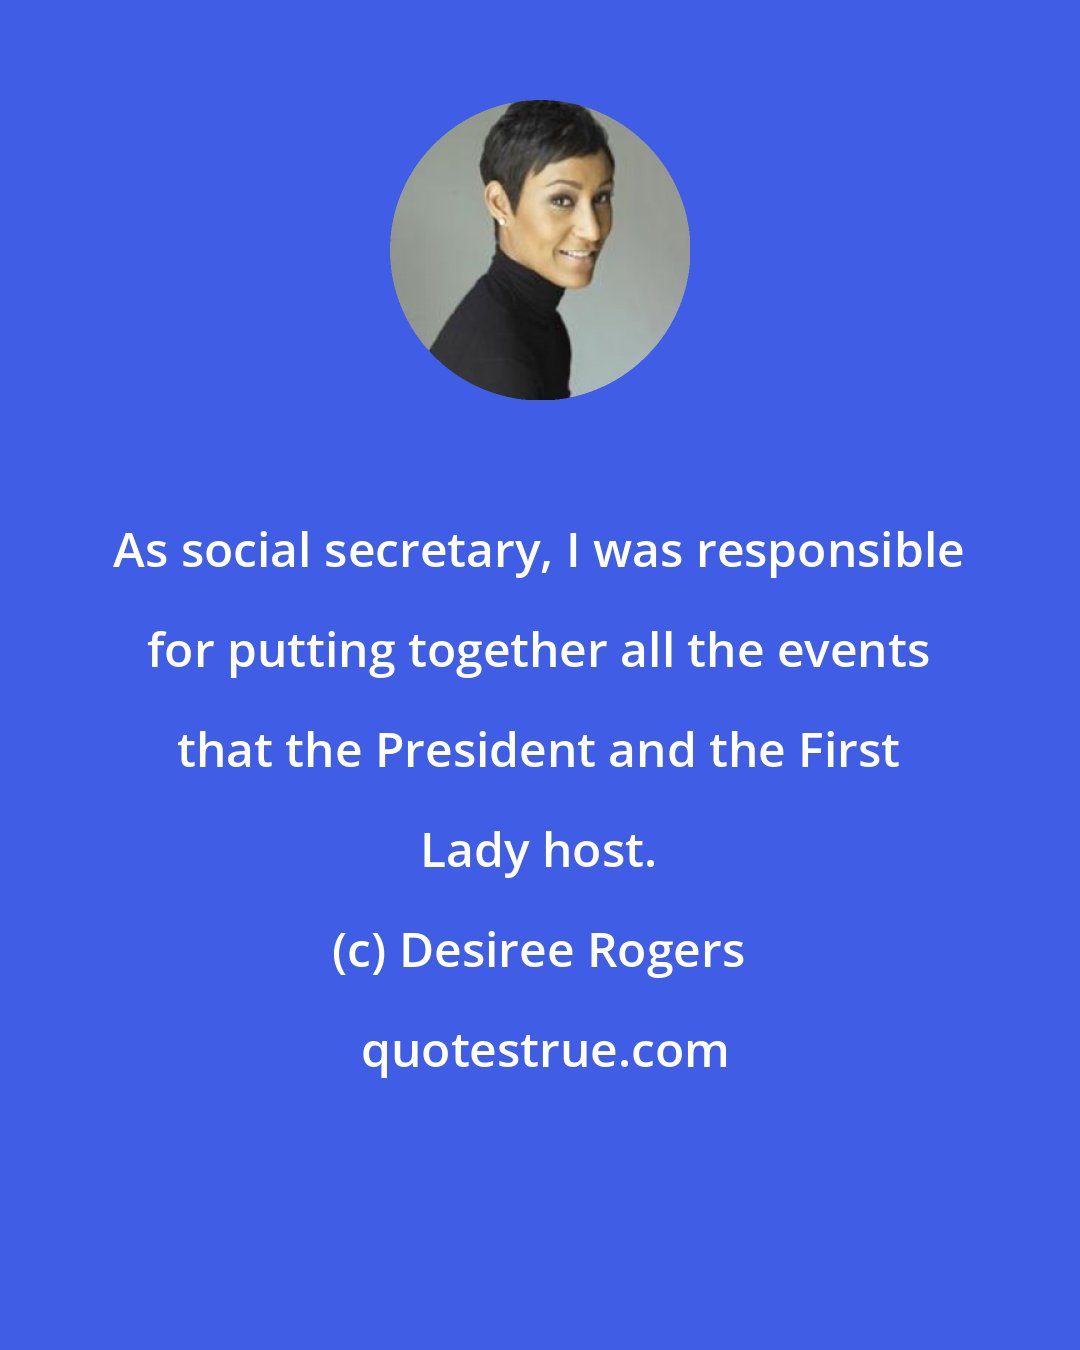 Desiree Rogers: As social secretary, I was responsible for putting together all the events that the President and the First Lady host.